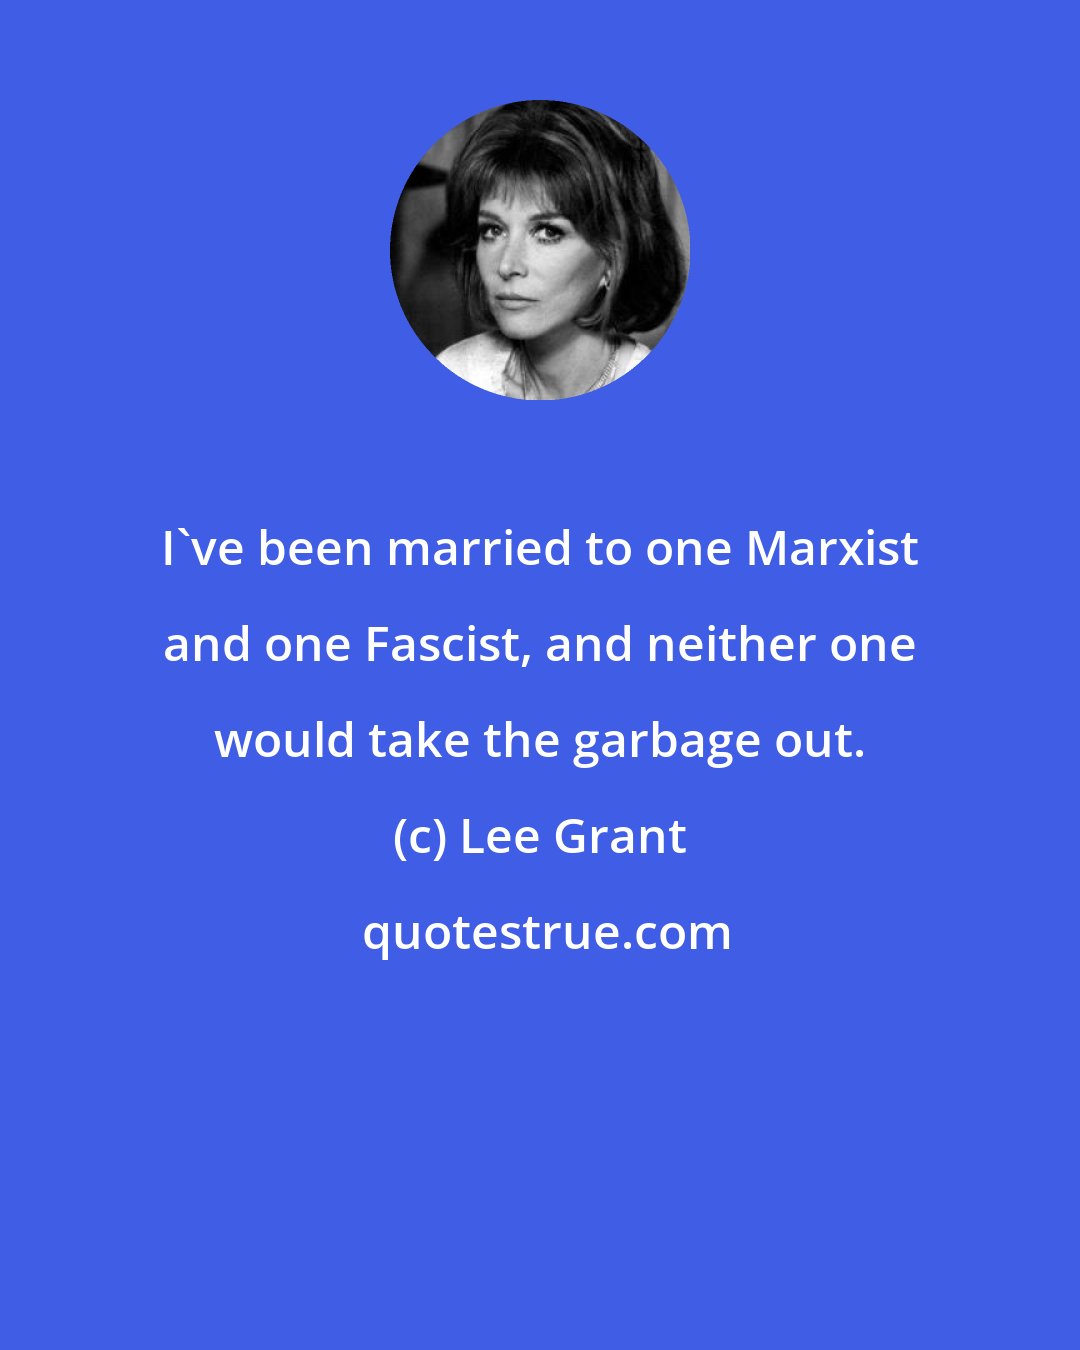 Lee Grant: I've been married to one Marxist and one Fascist, and neither one would take the garbage out.